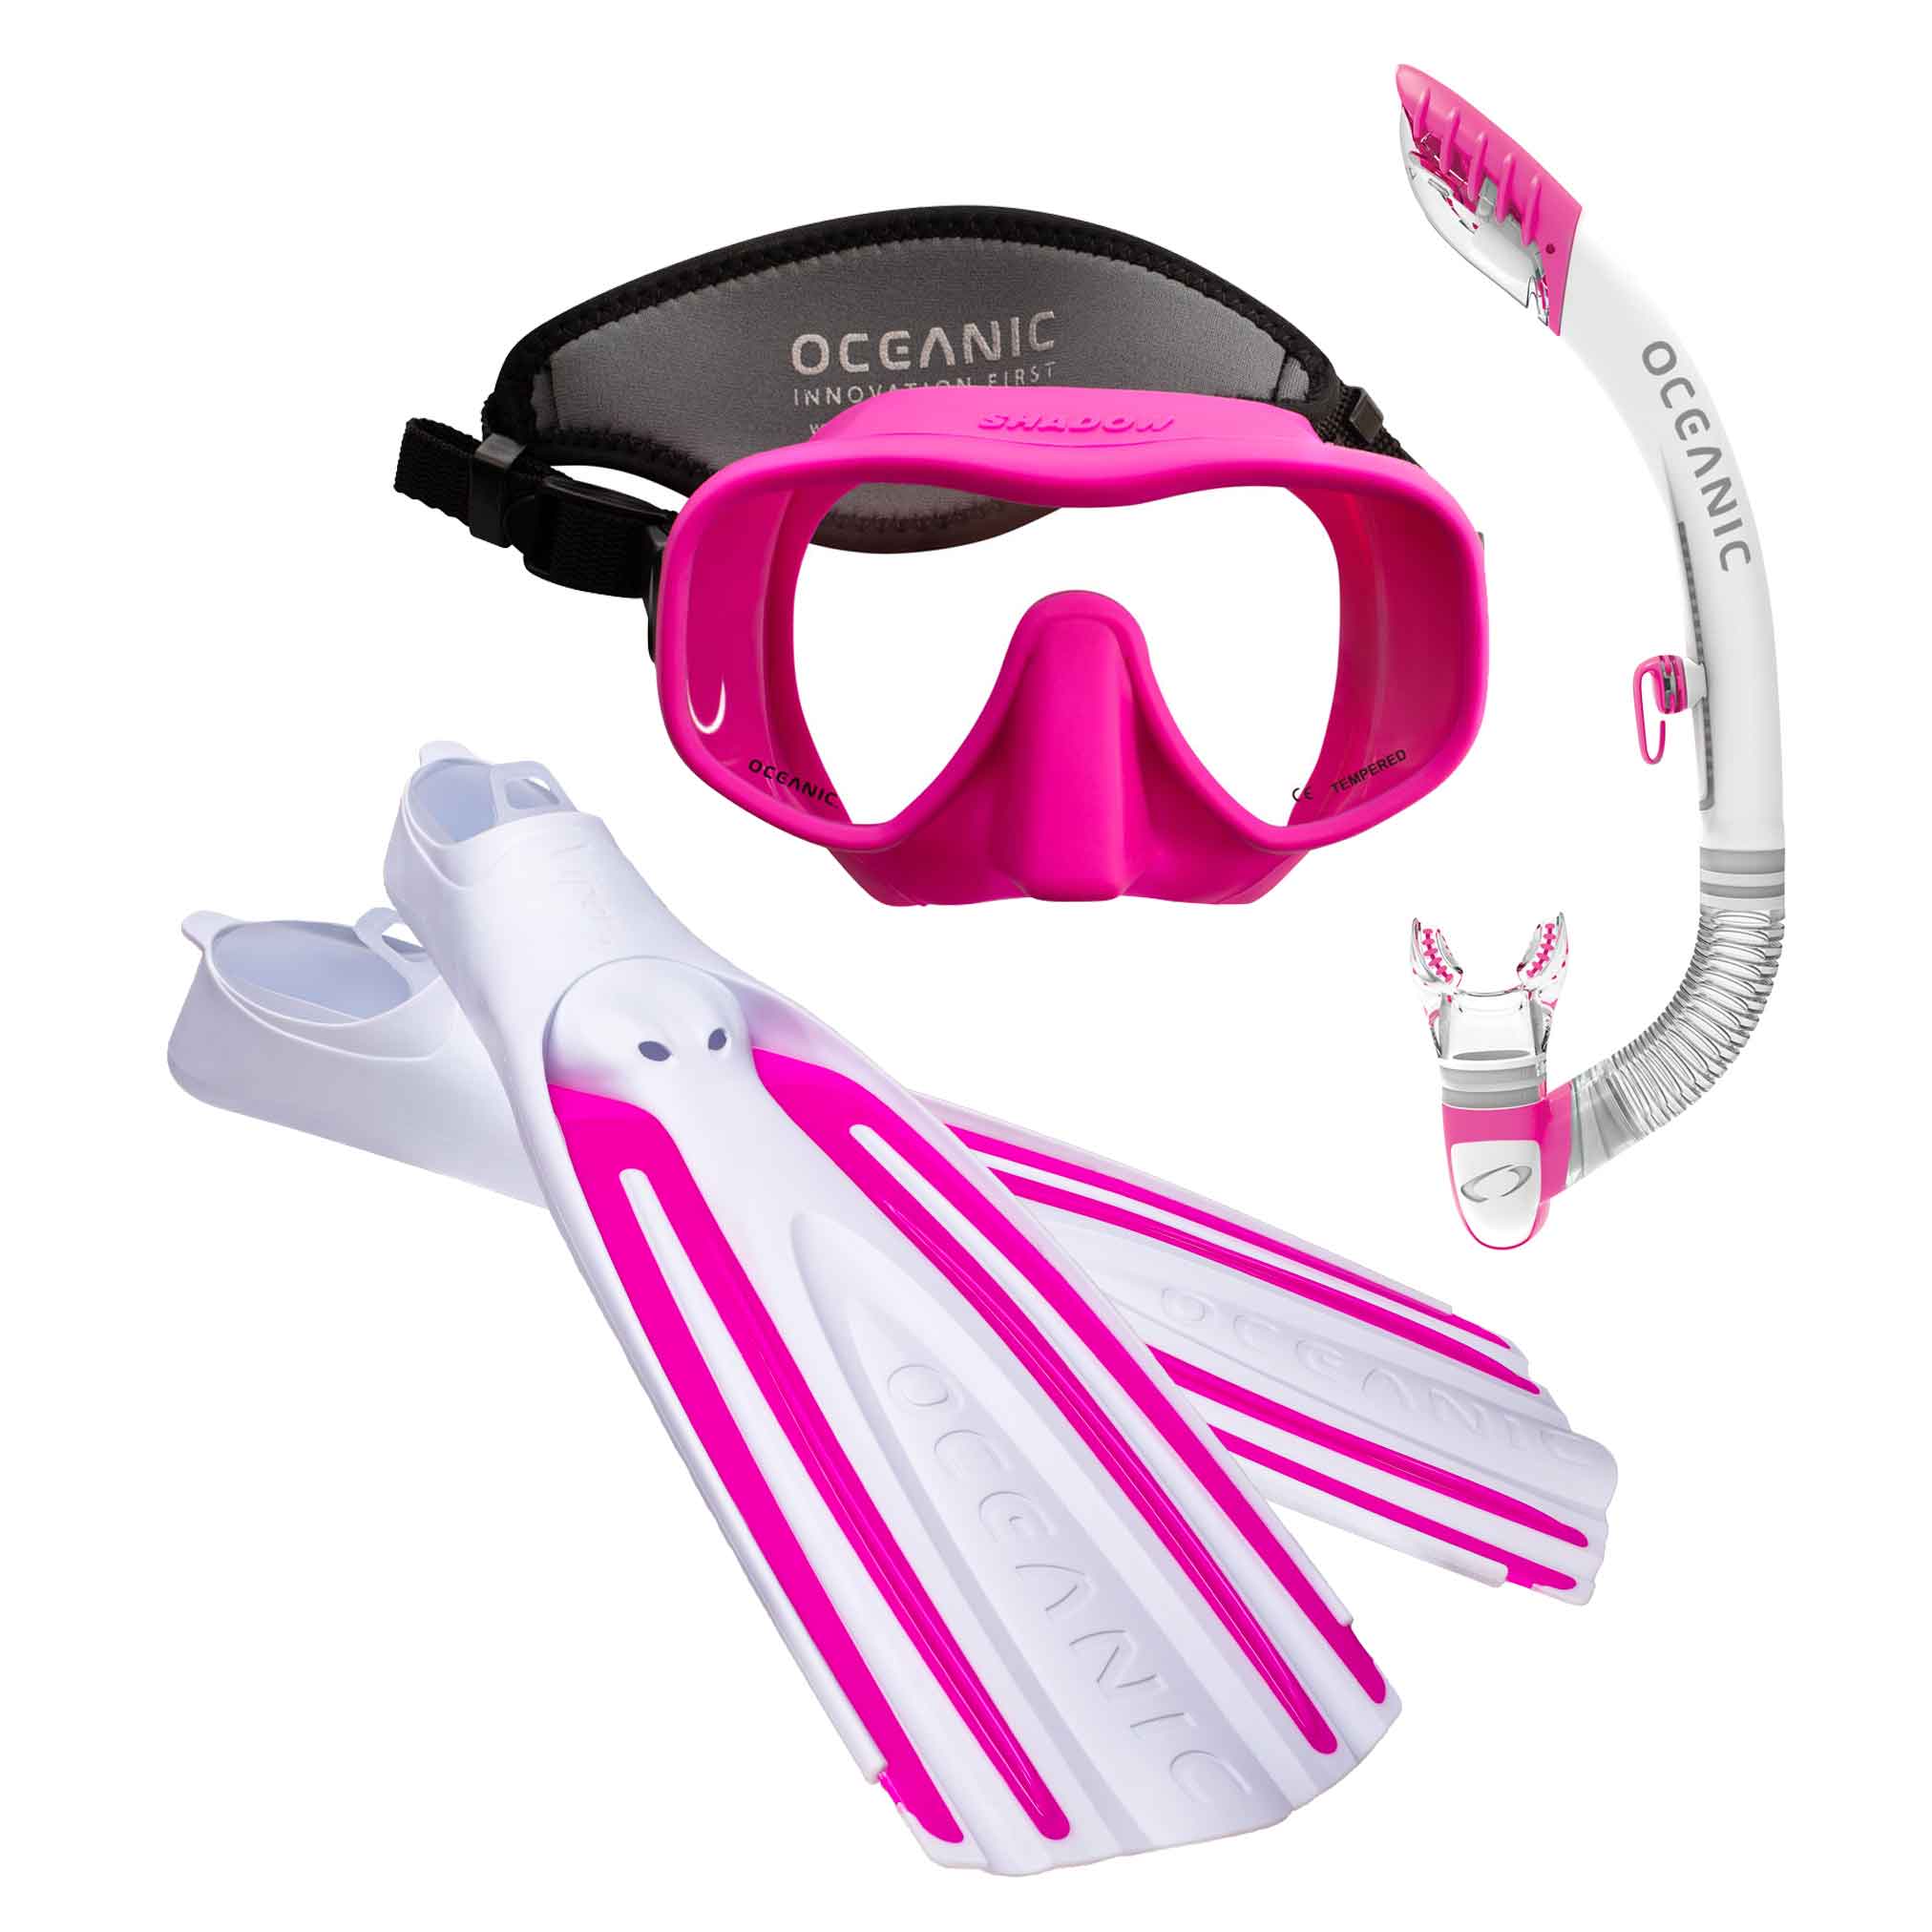 Oceanic New Accent Scuba Diving & Snorkeling Mask (Pink) with Free Neoprene  Comfort Strap ($12.95 Value)